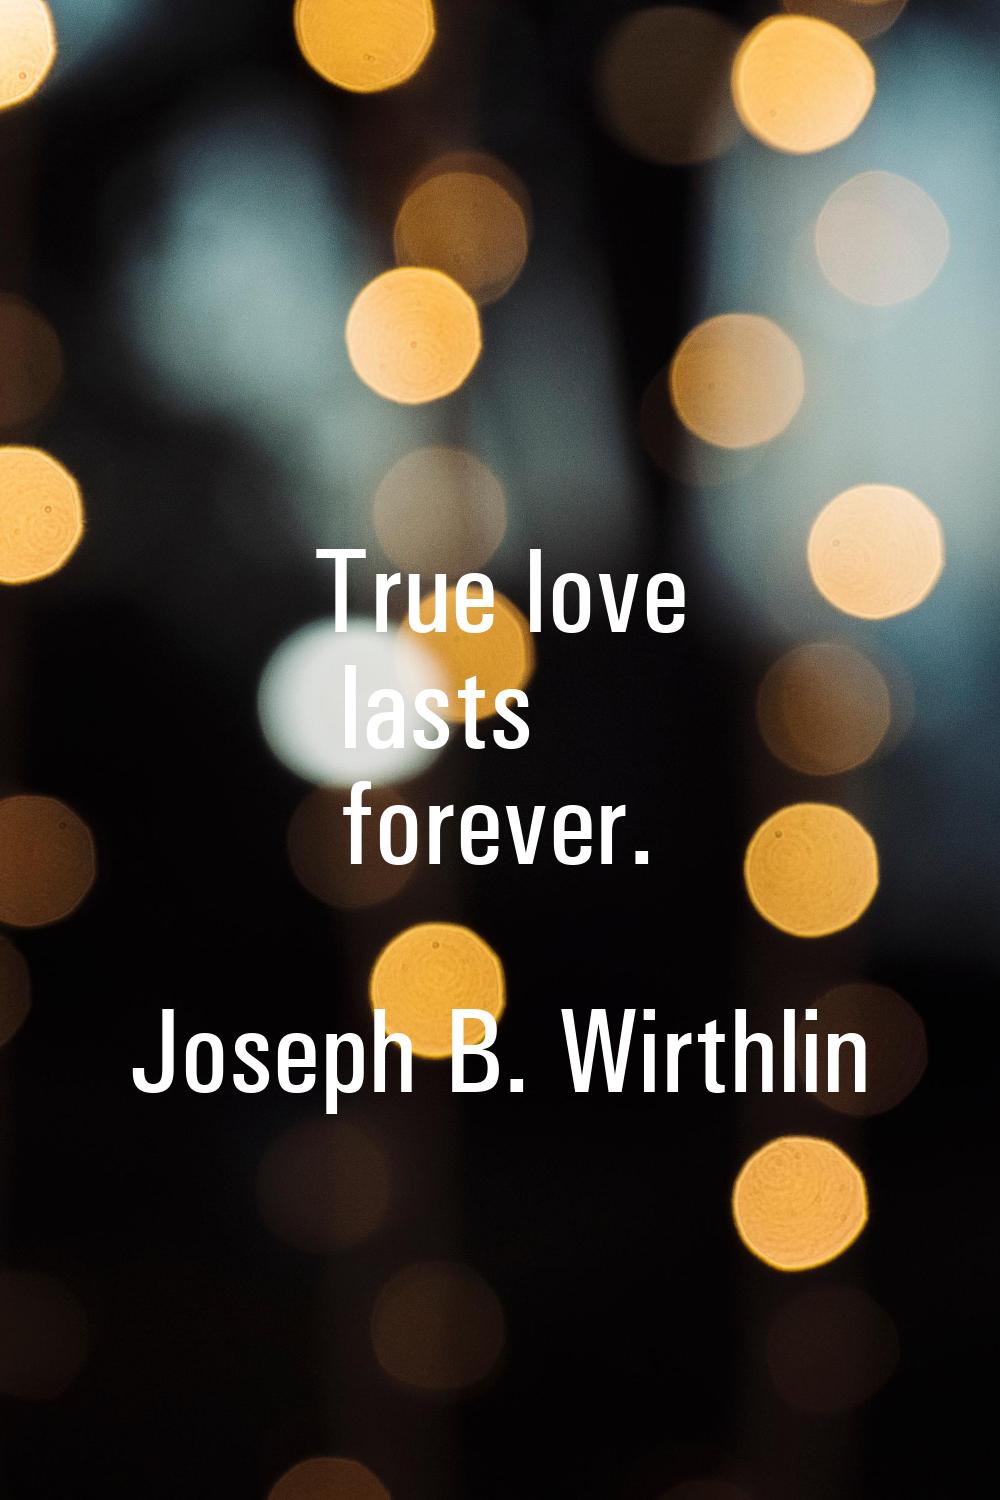 True love lasts forever.